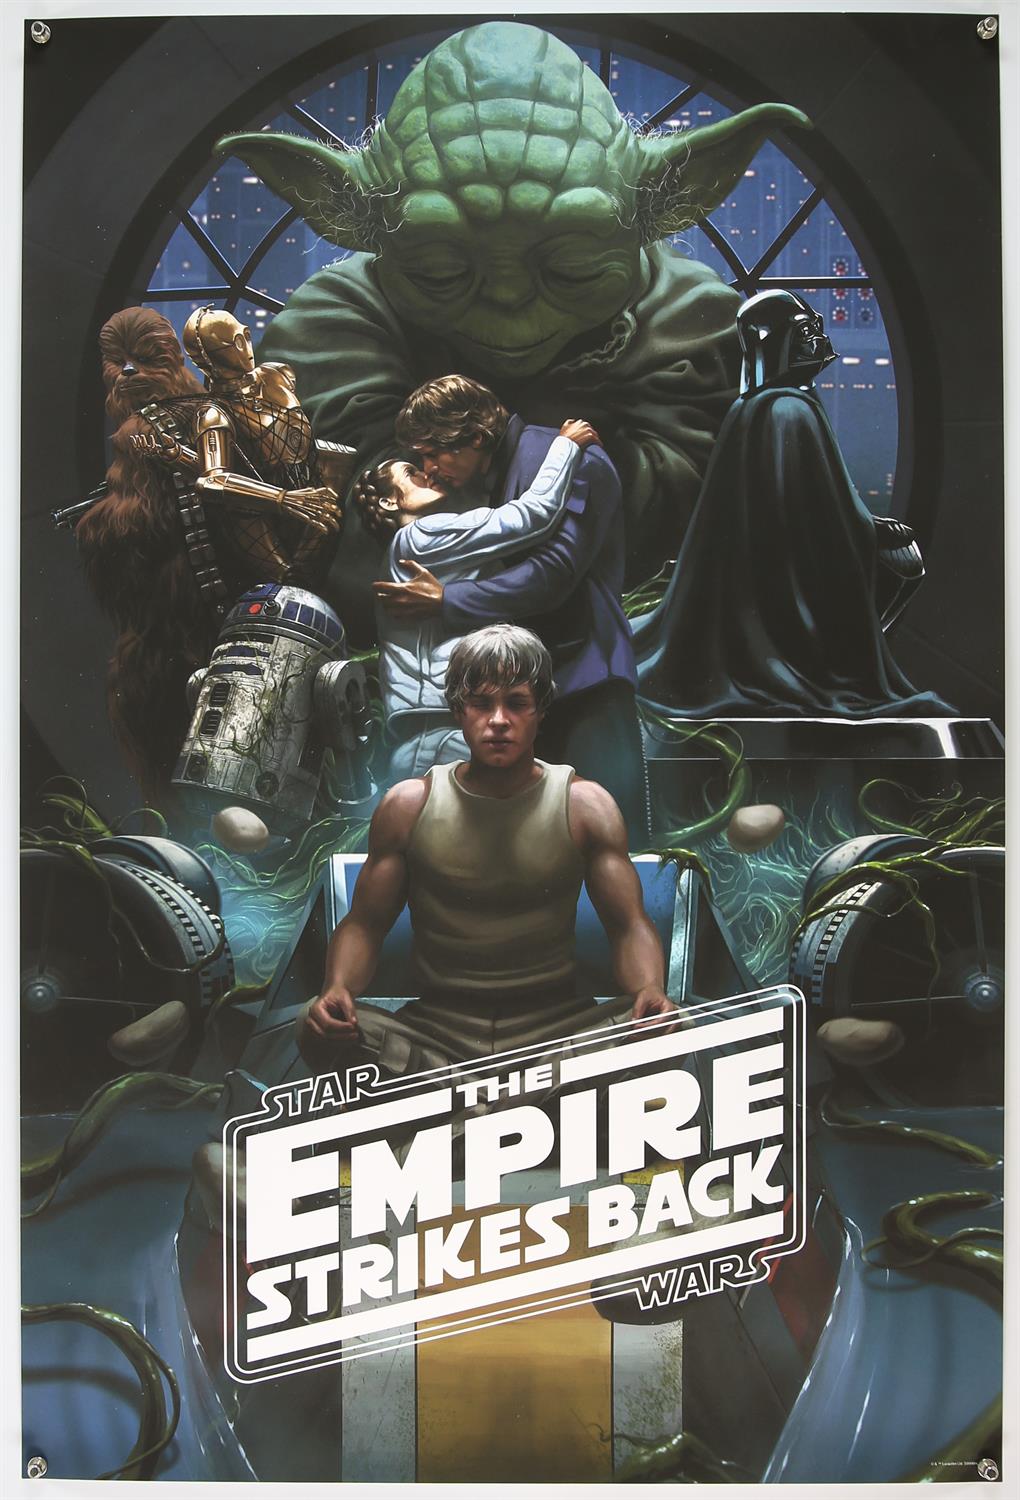 Star Wars The Empire Strikes Back (1980) Mondo style limited edition print, hand numbered, rolled,